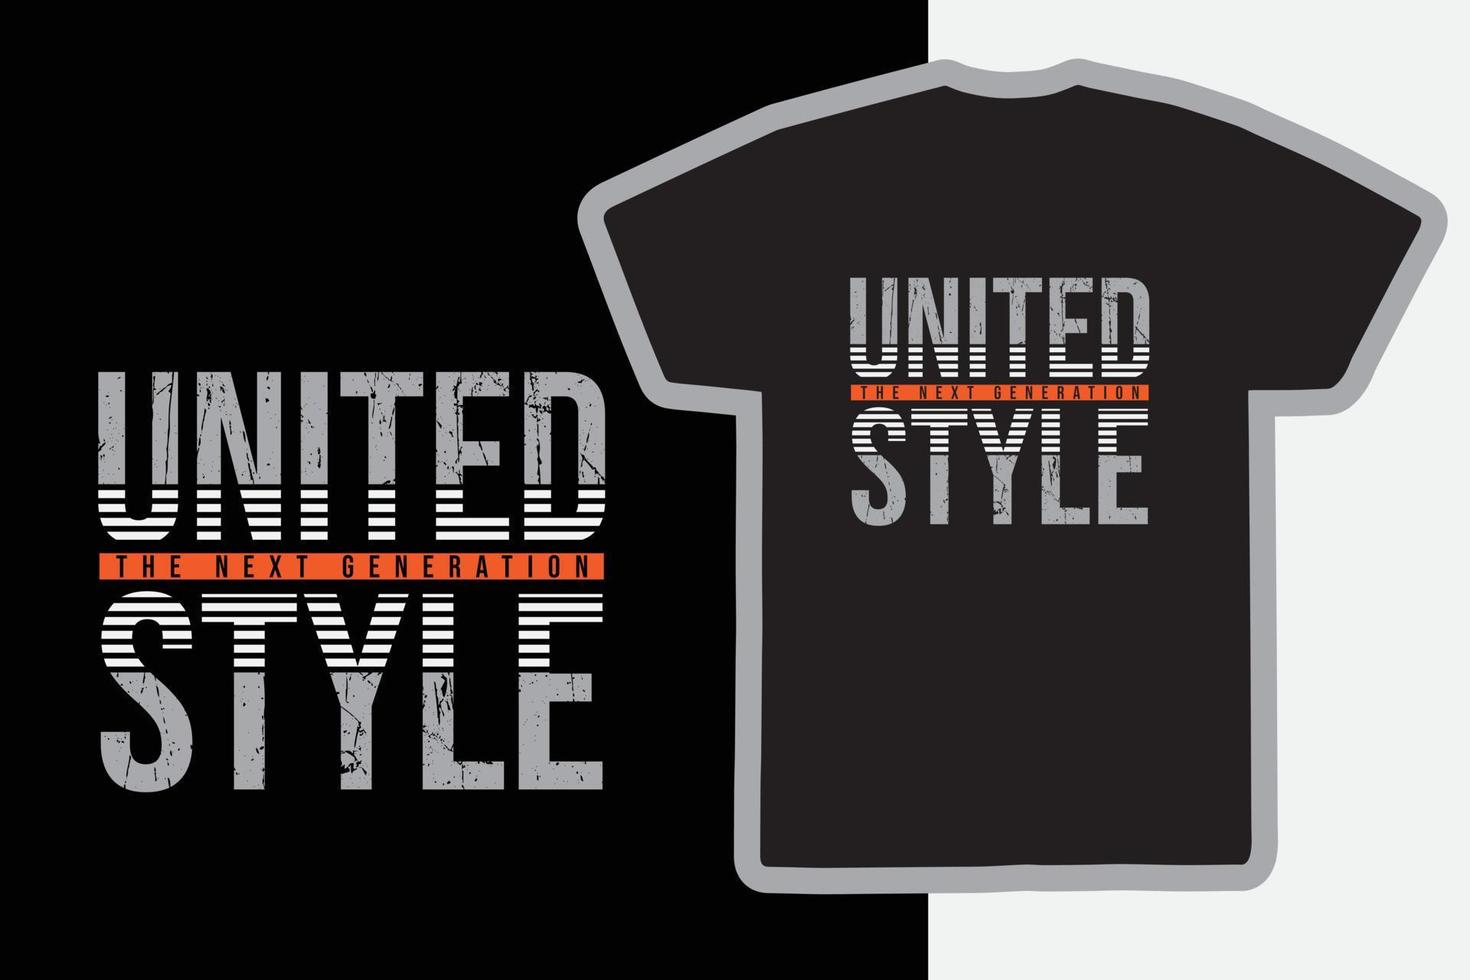 United style t-shirt and apparel design vector